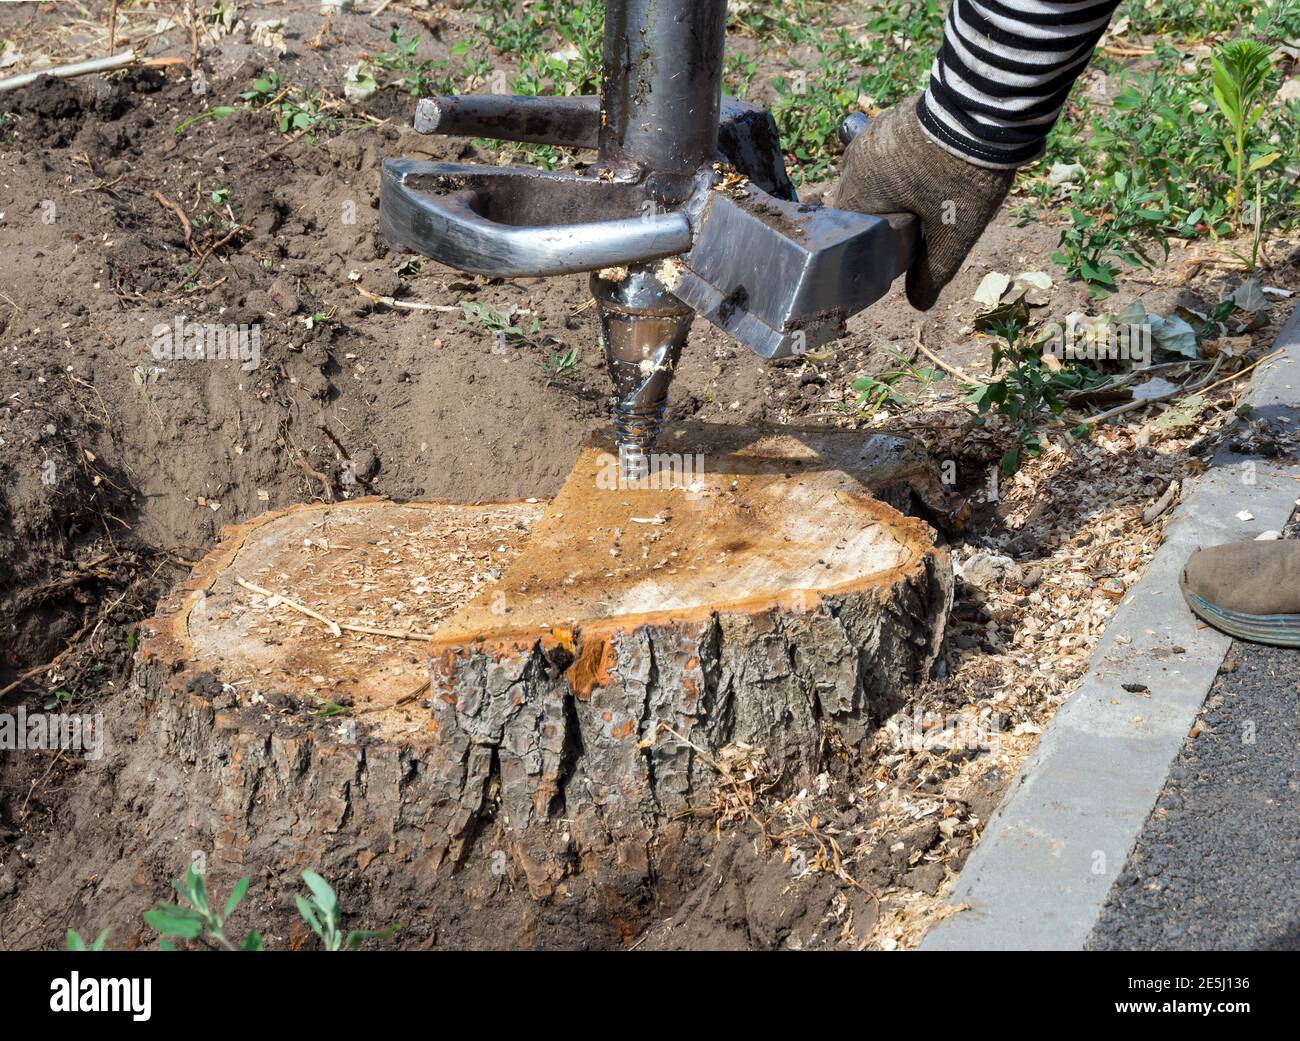 A worker sets up a cutter to drill out an old tree stump Stock Photo